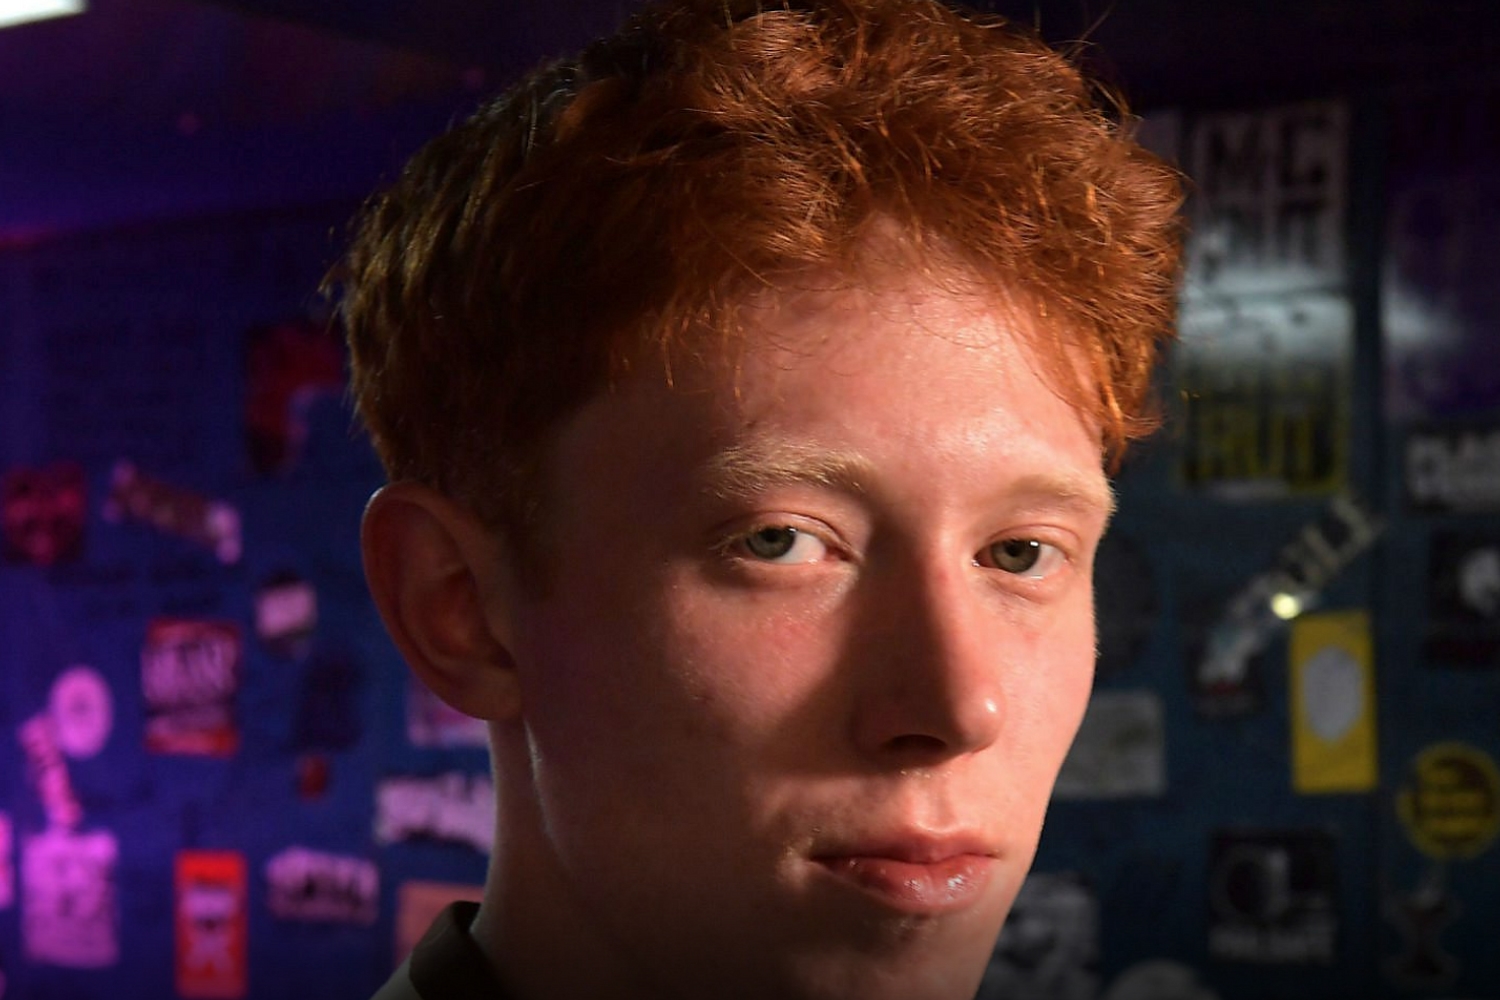 Listen to King Krule live in session at Maida Vale